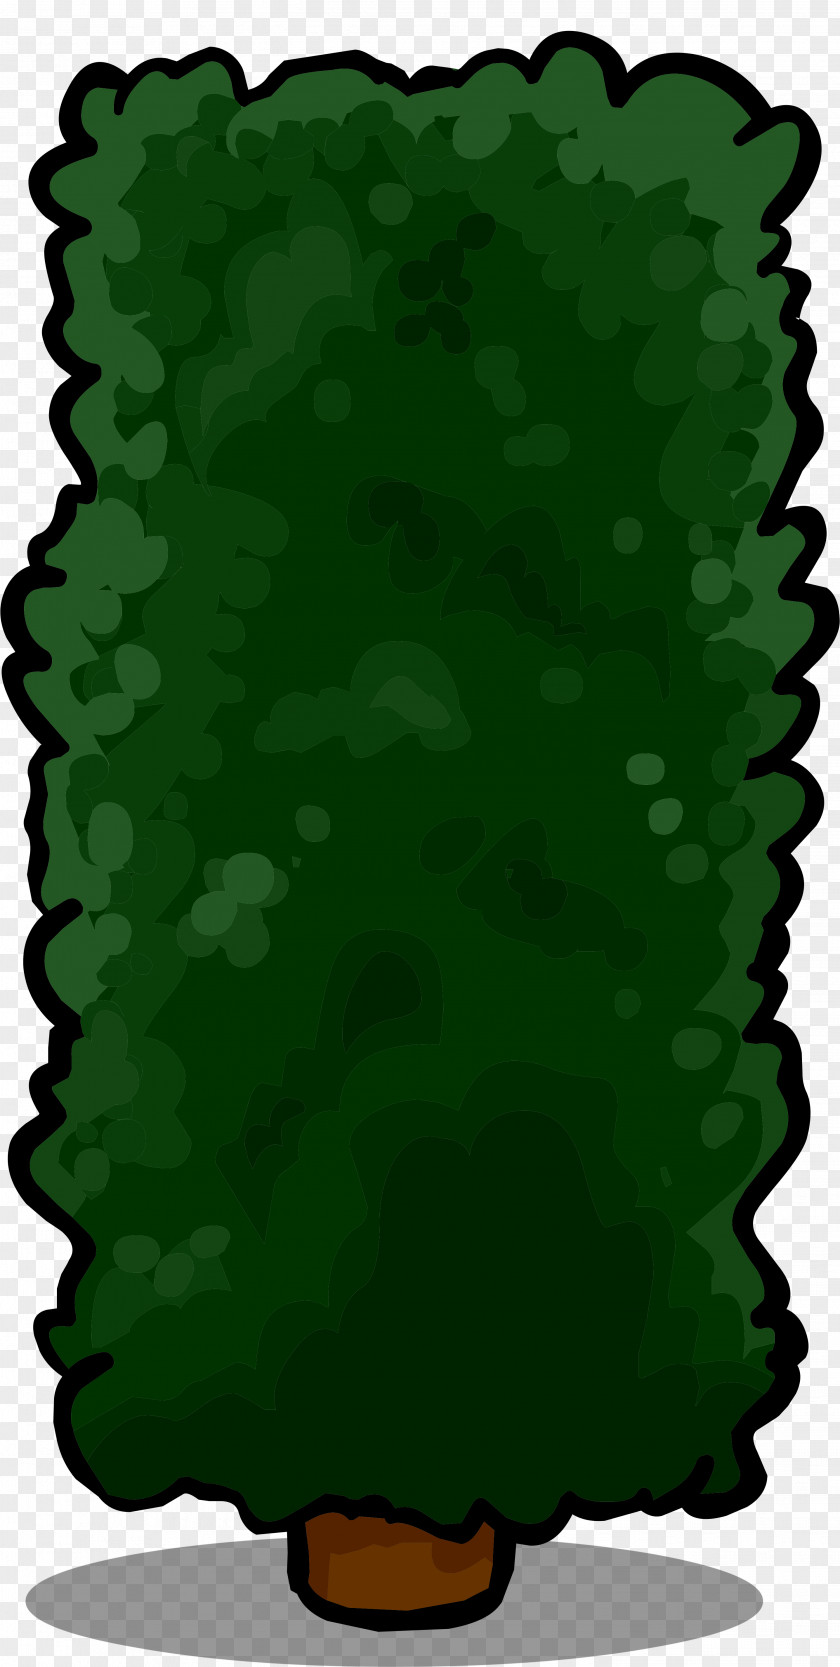 Tree Clip Art Image Hedge Vector Graphics PNG